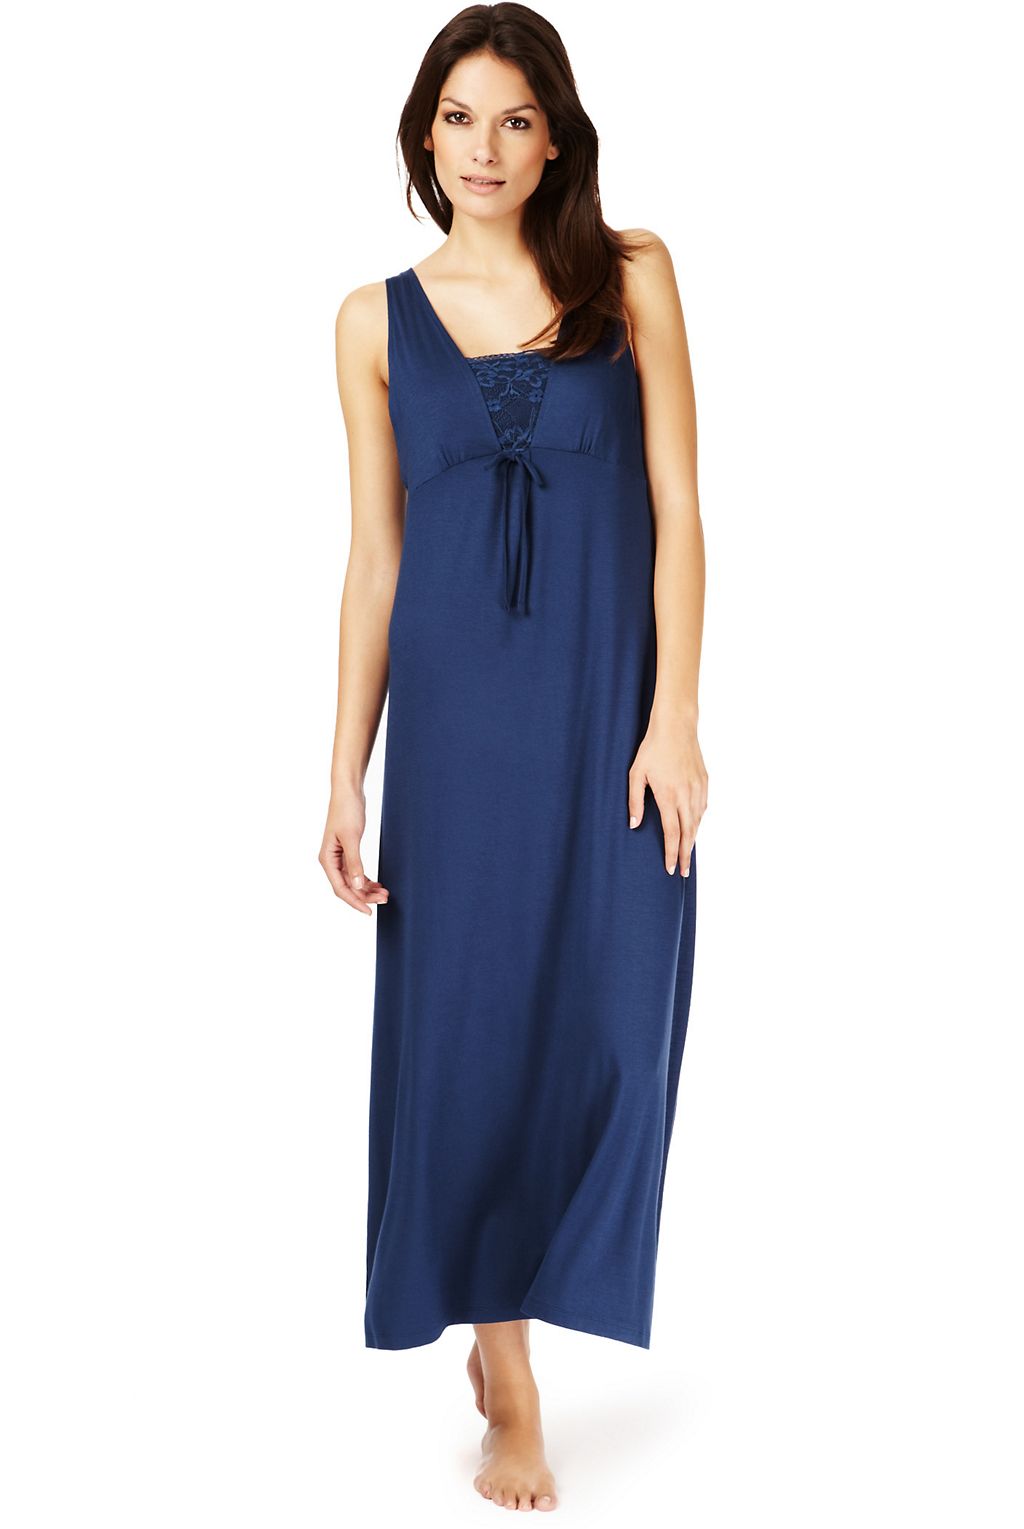 Floral Nightdress with Secret Slimming™ 1 of 1